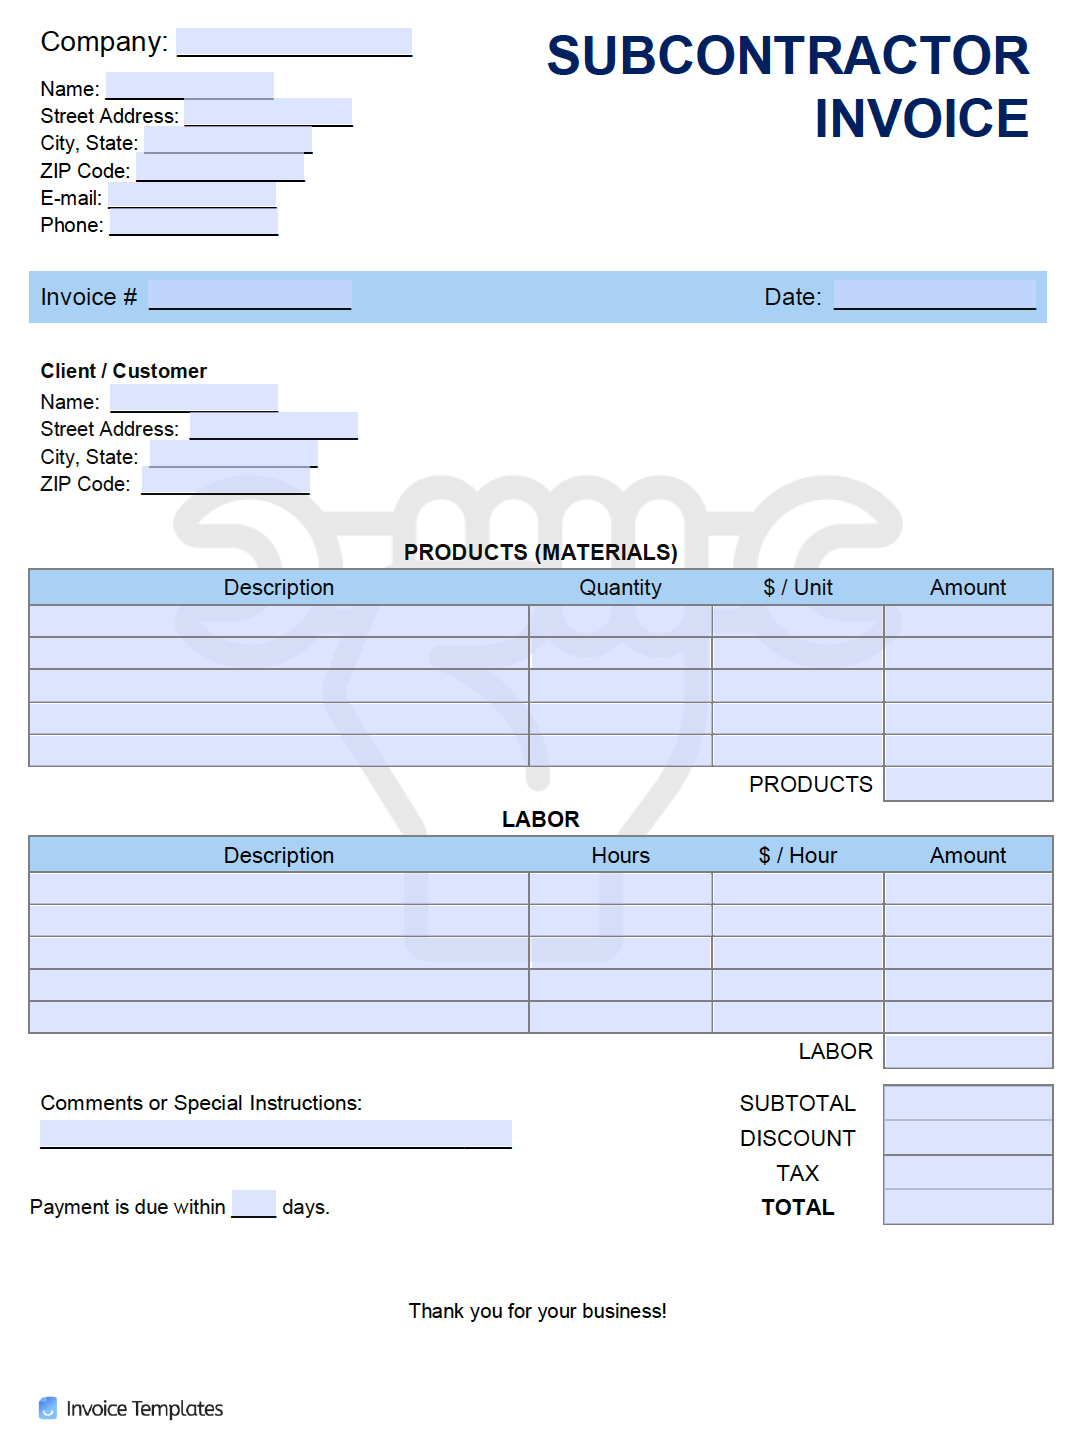 Free Subcontractor Invoice Template  PDF  WORD  EXCEL In General Contractor Invoice Template